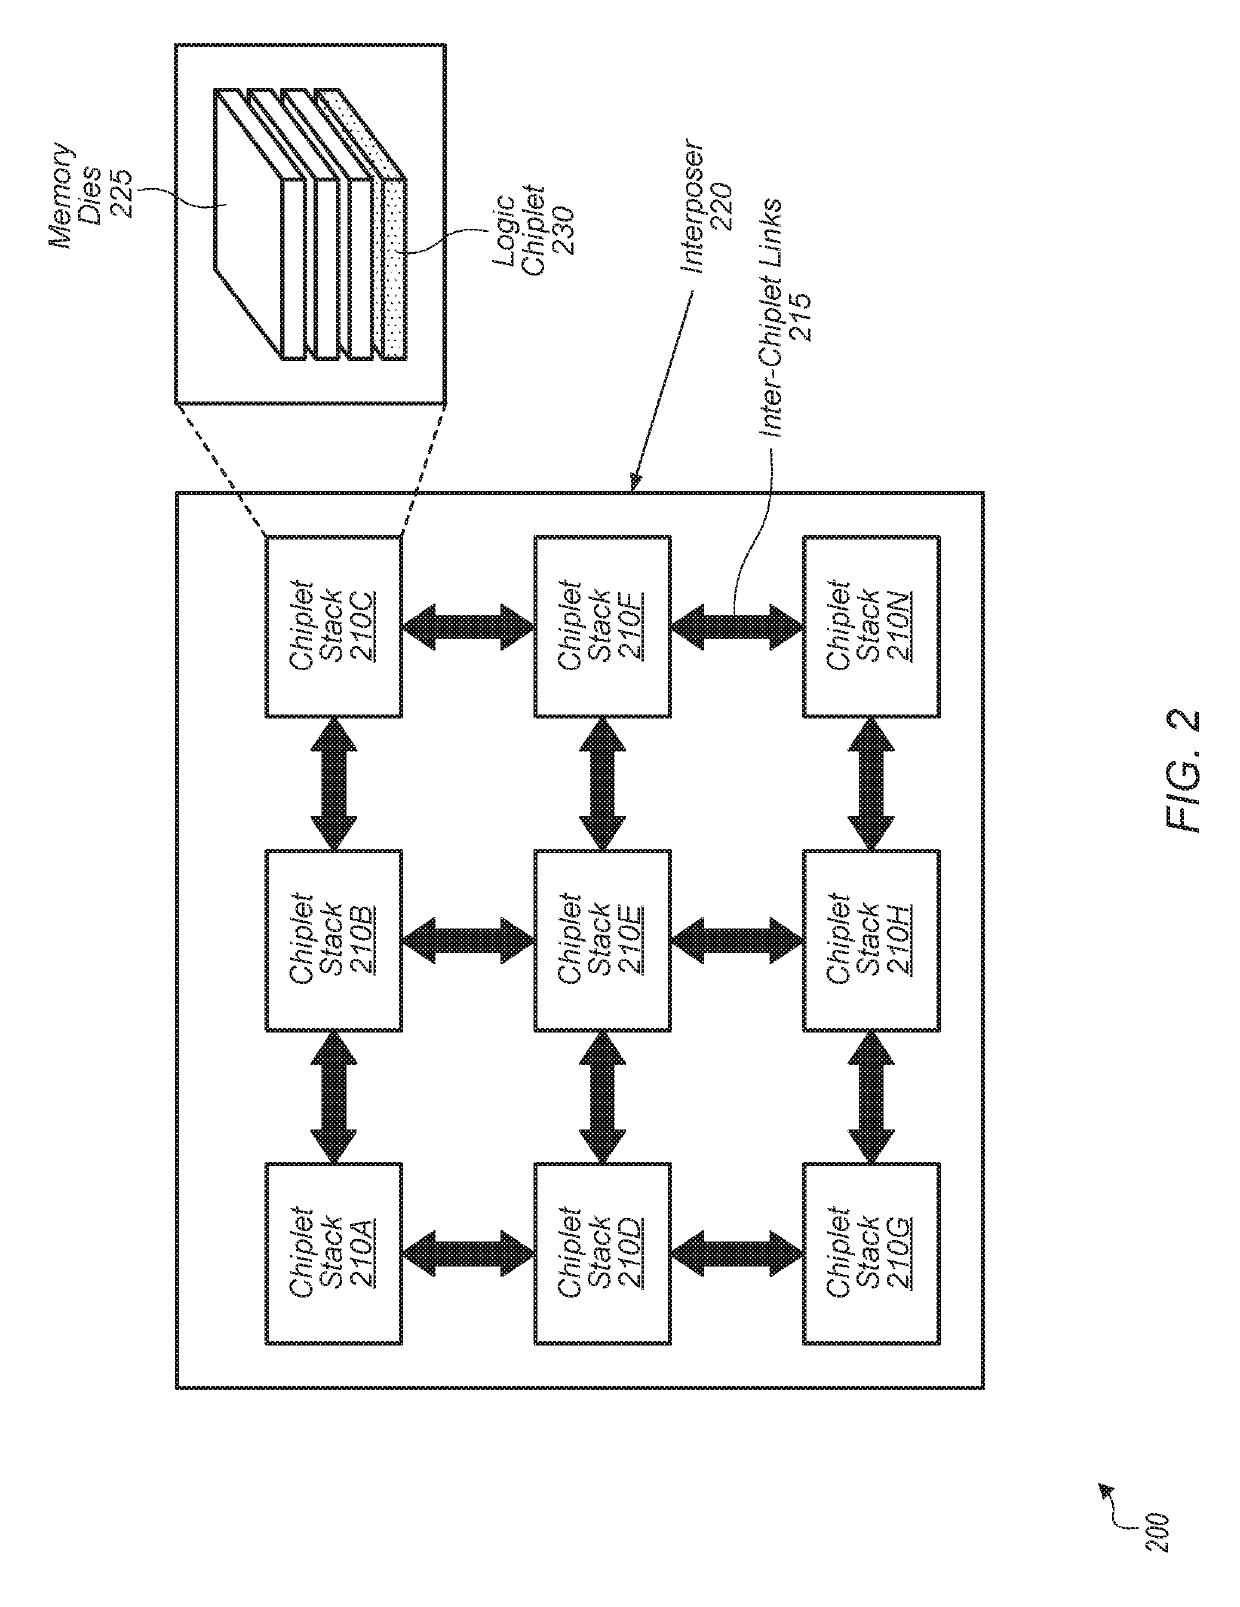 Per-page control of physical address space distribution among memory modules